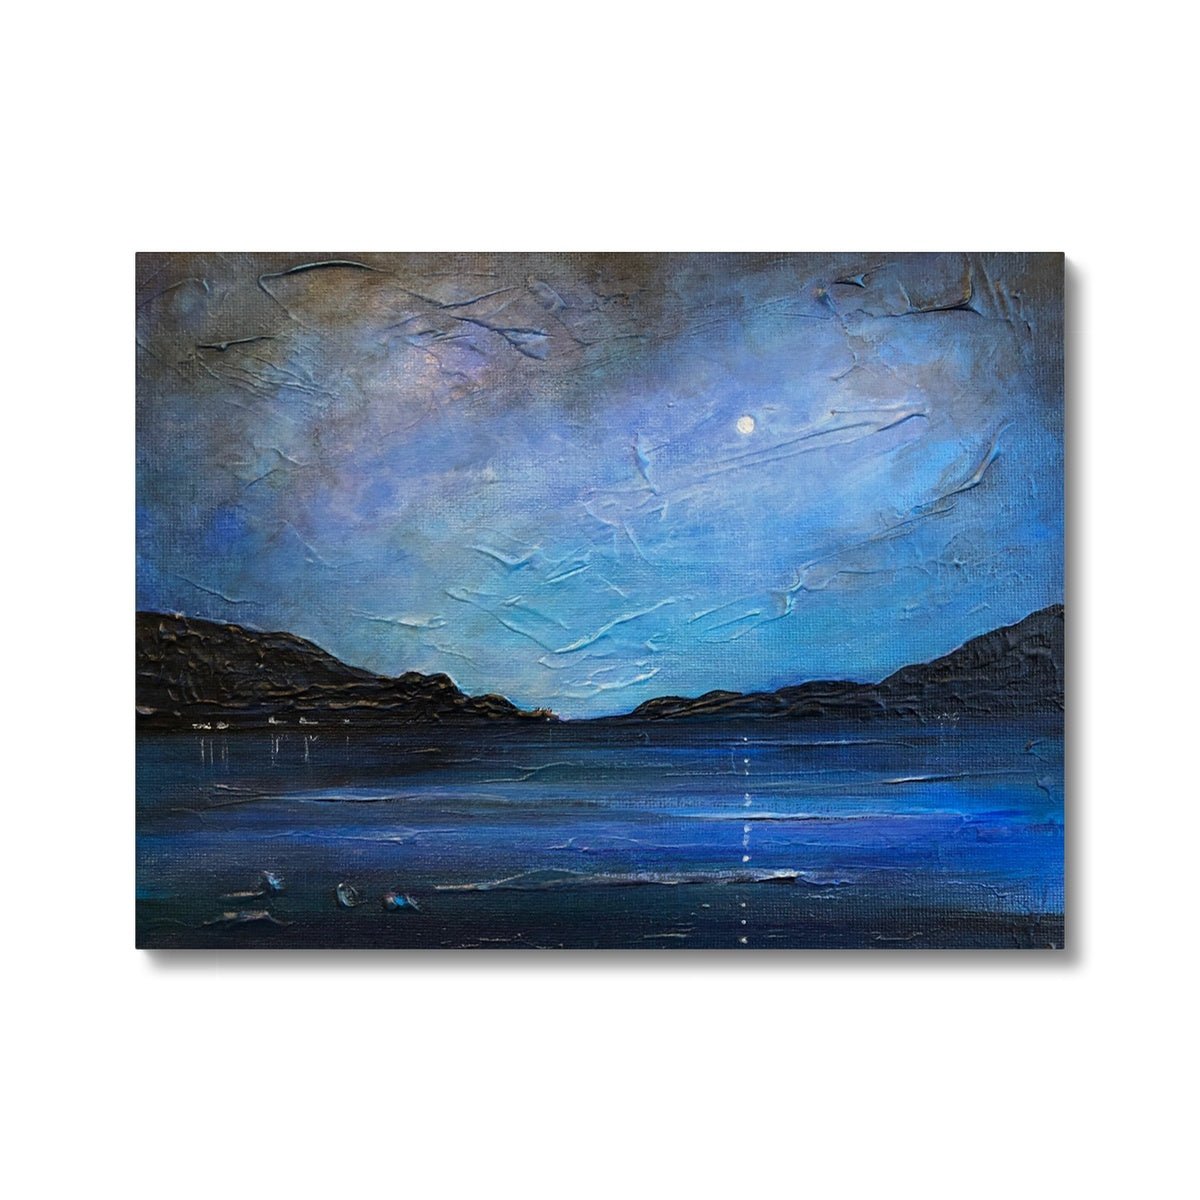 Loch Ness Moonlight Painting | Canvas-Contemporary Stretched Canvas Prints-Scottish Lochs & Mountains Art Gallery-24"x18"-Paintings, Prints, Homeware, Art Gifts From Scotland By Scottish Artist Kevin Hunter